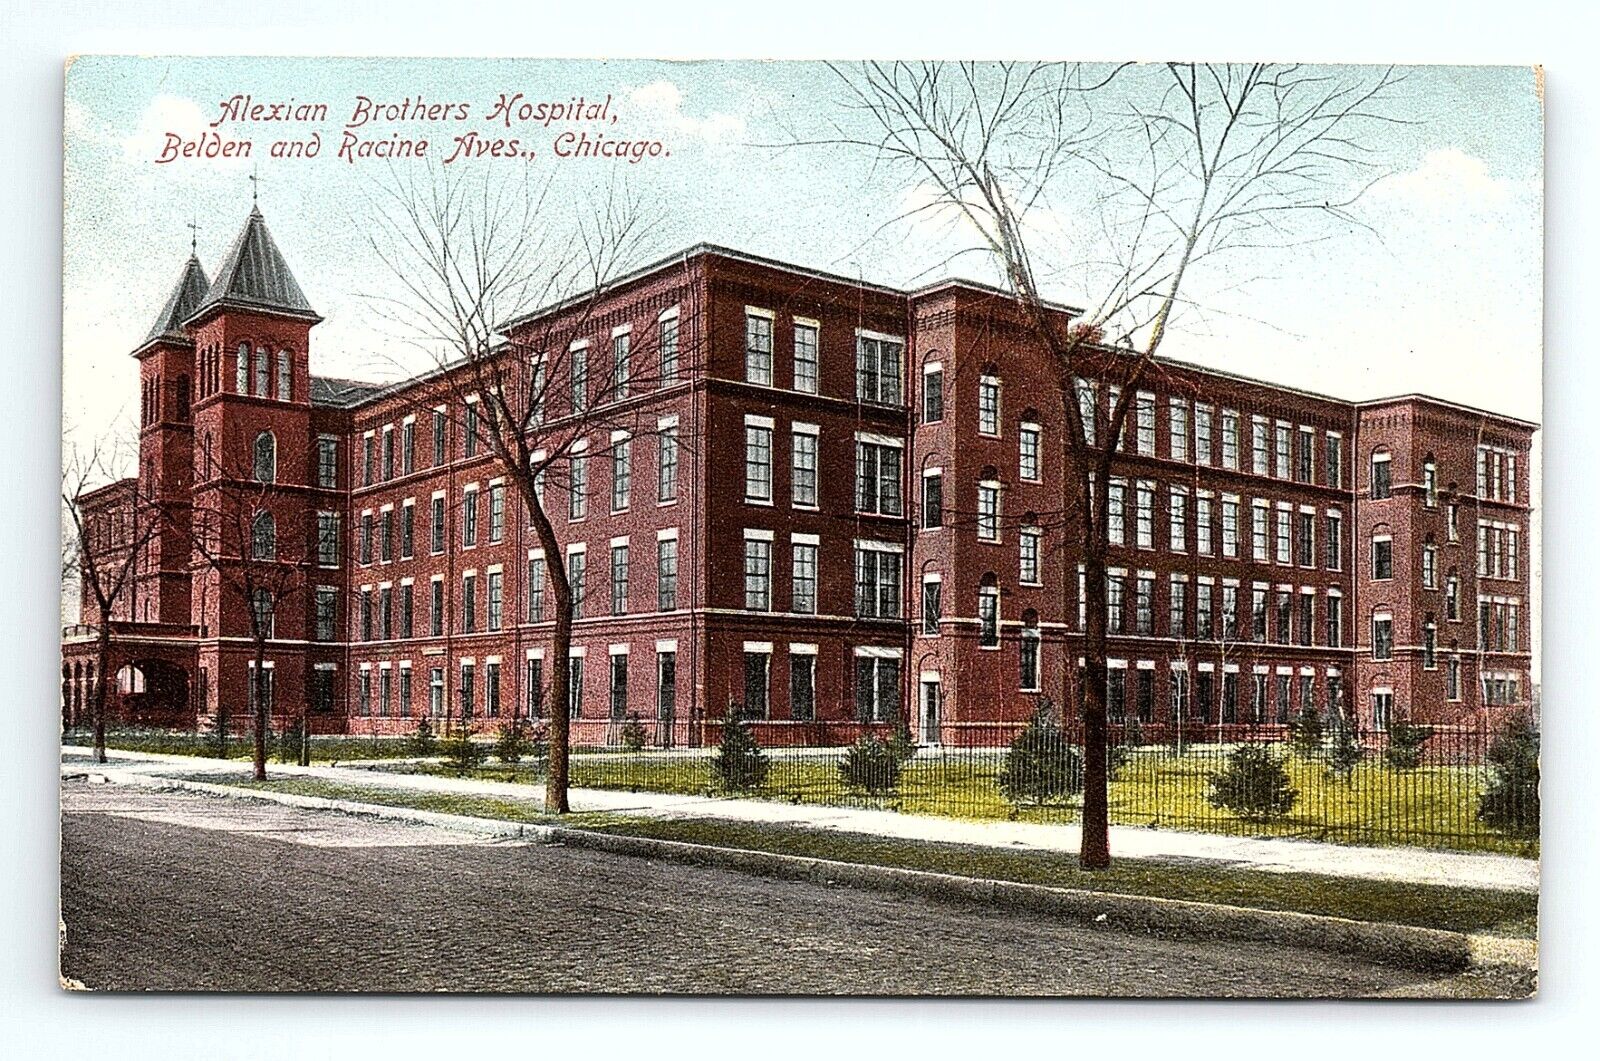 Alexian Brothers Hospital Belden And Racine Aves Chicago Illinois VTG Postcard